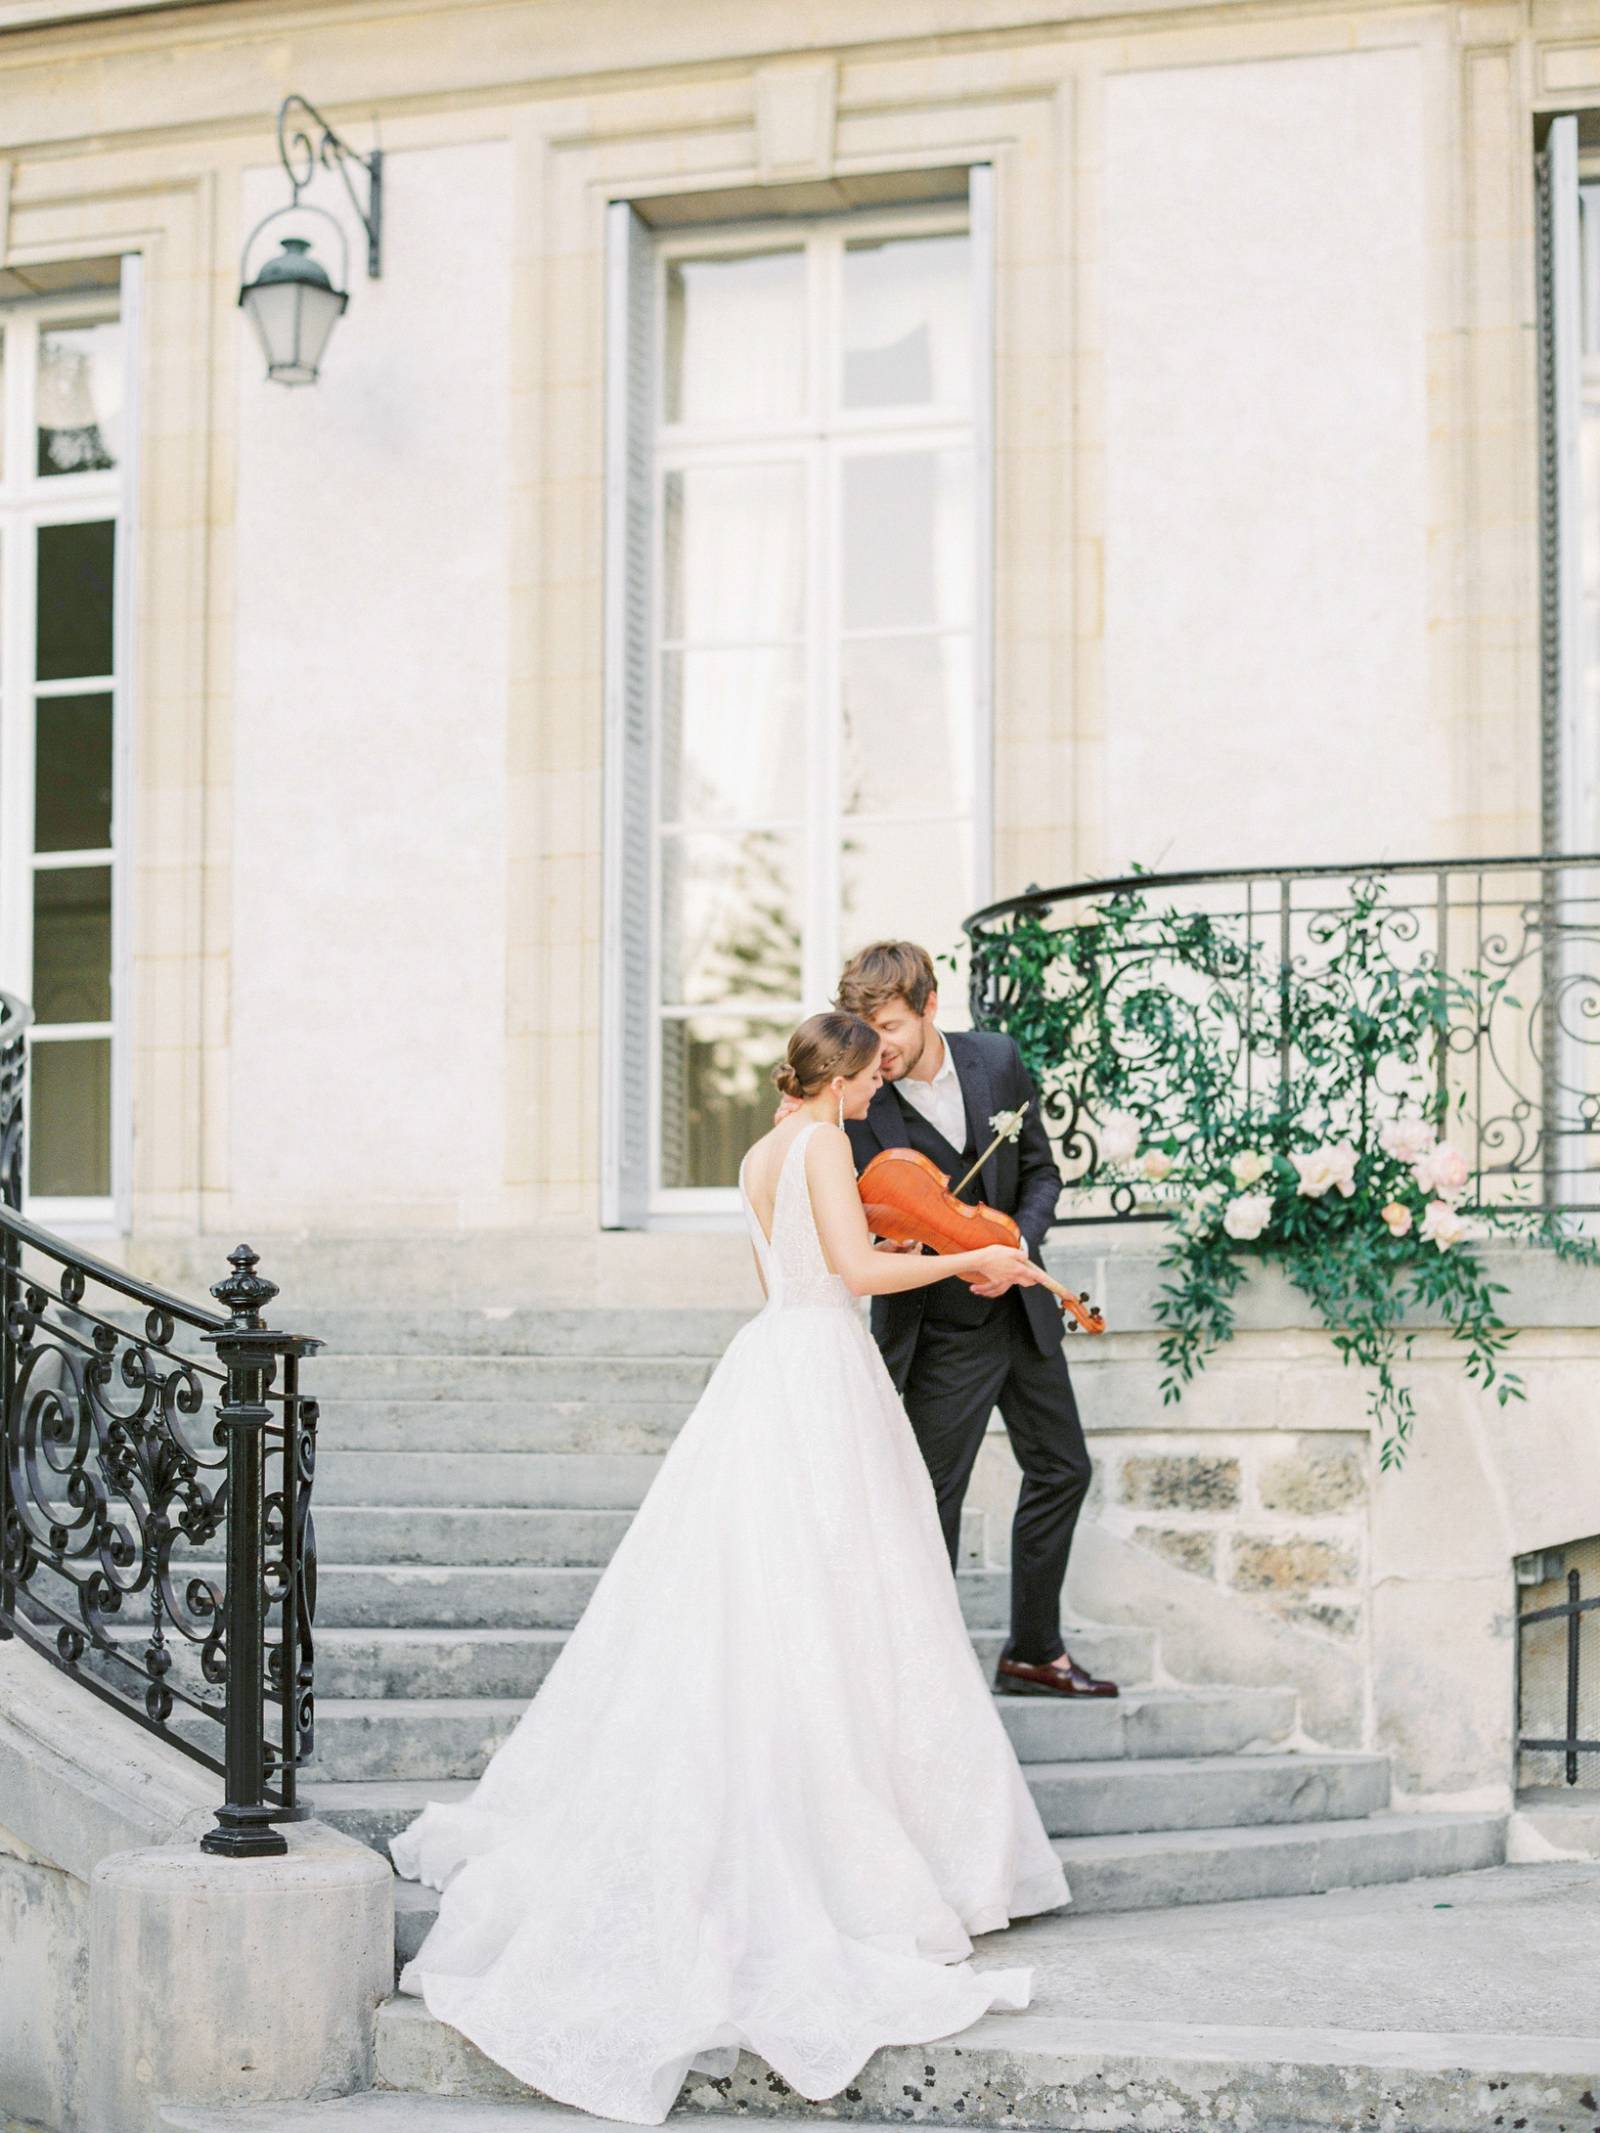 A Parisian love story inspired by classical music and travel | Paris ...